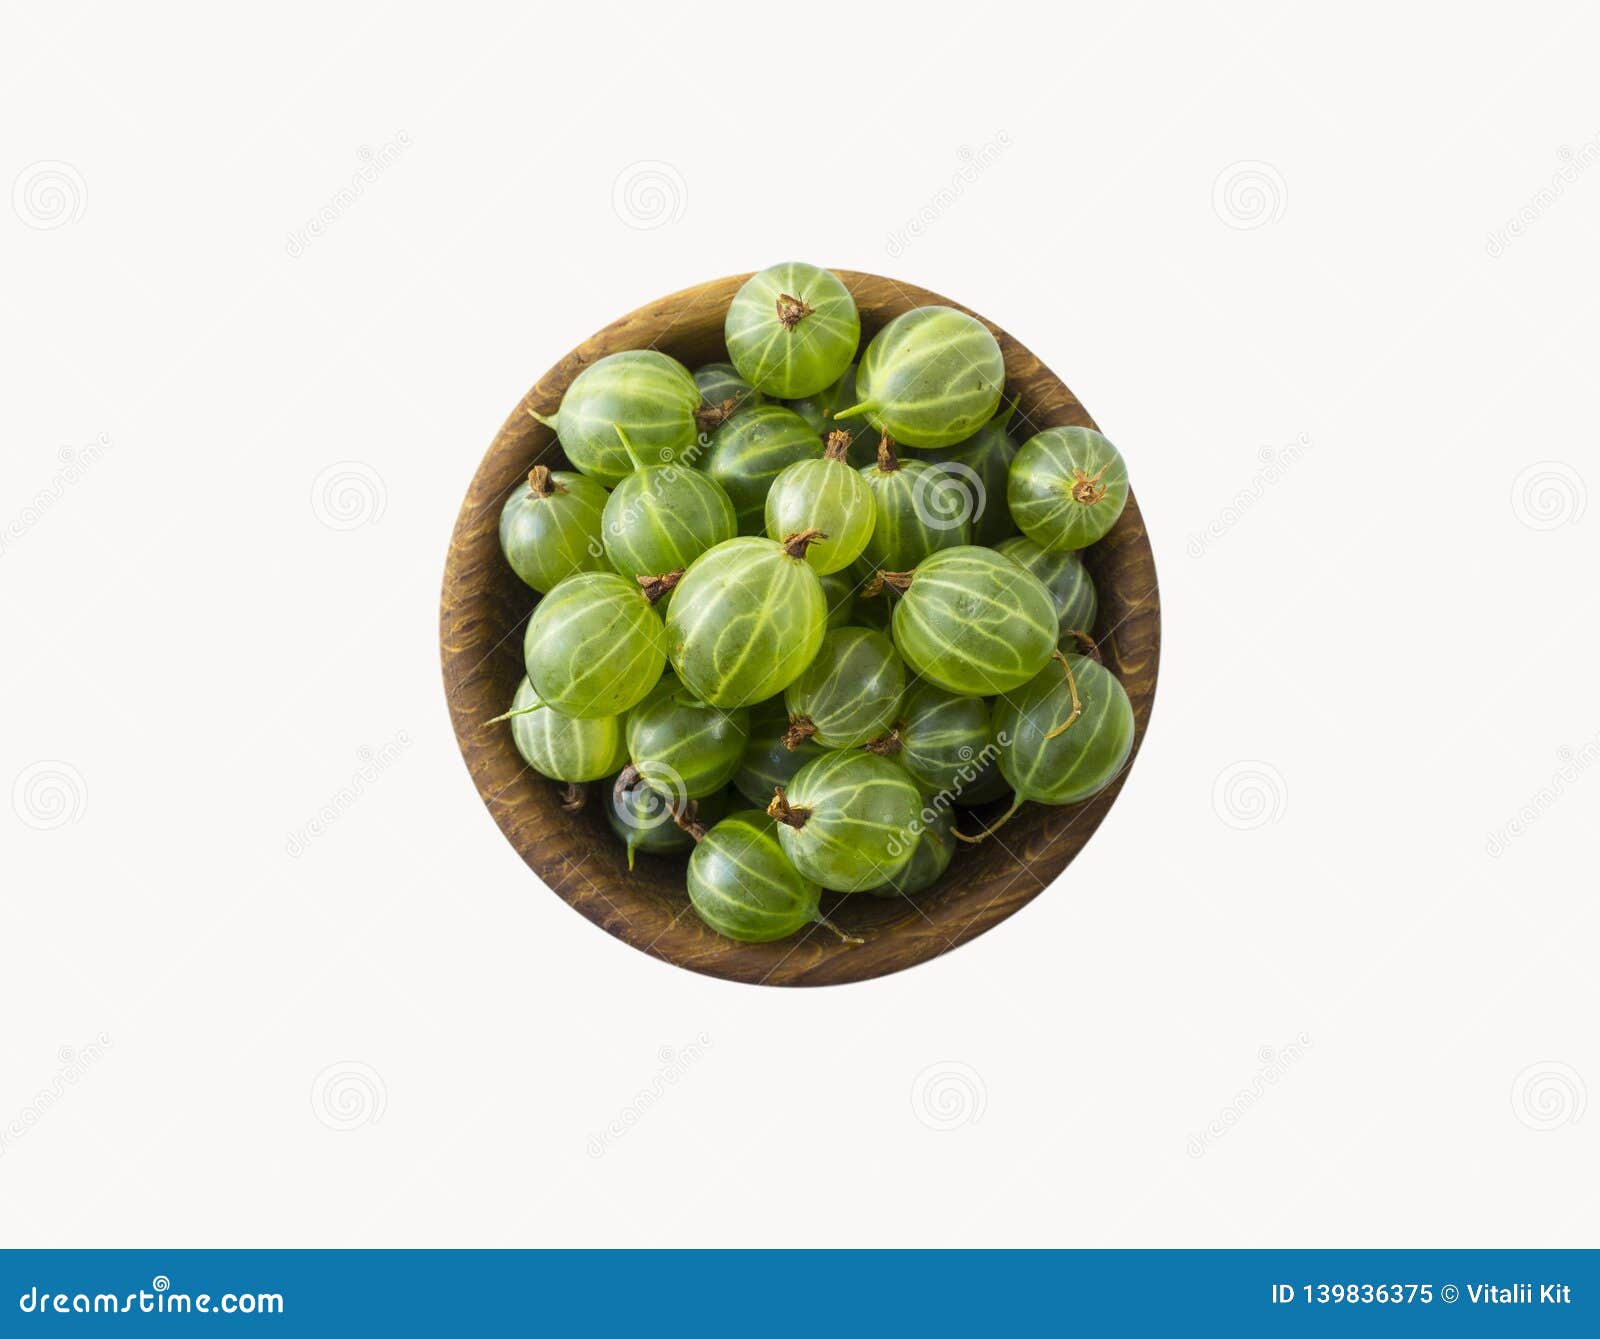 Gooseberries Fruits Isolated on White Background. Gooseberries in a ...